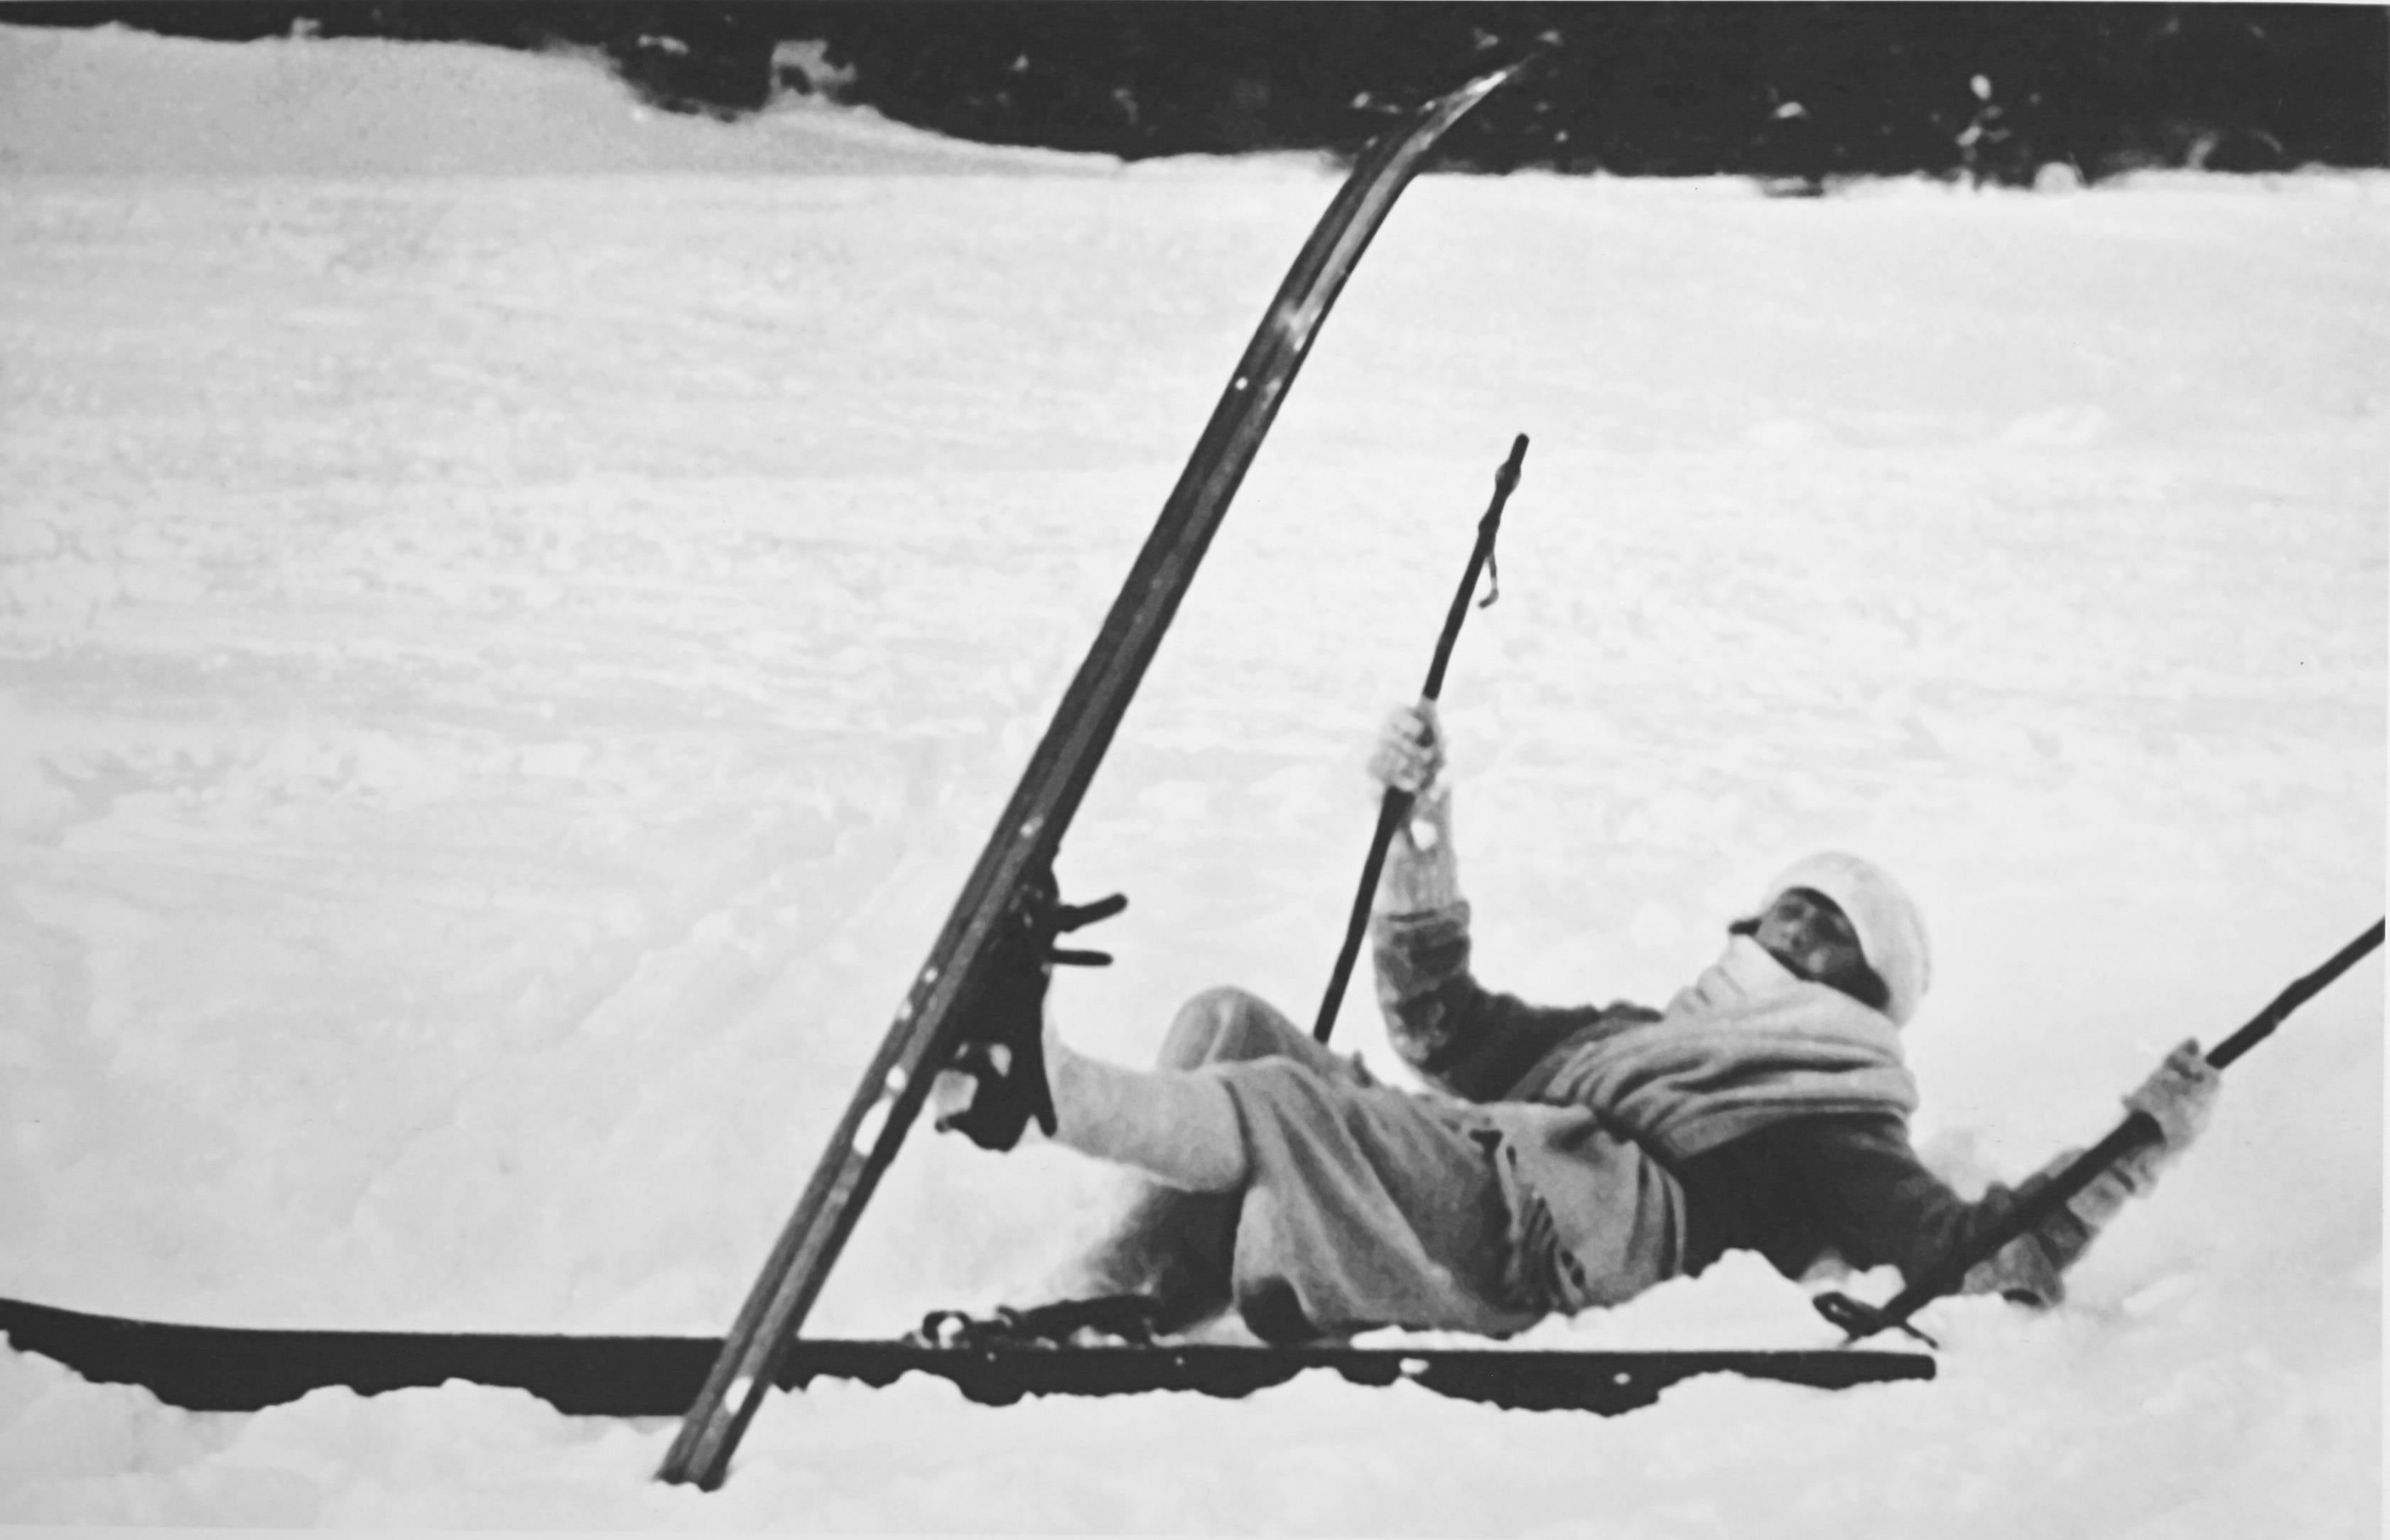 Alpine Ski photograph.
'OPPS!', a new mounted black and white photographic image after an original 1930s skiing photograph. Black and white alpine photos are the perfect addition to any home or ski lodge. Prior to being a recreational activity